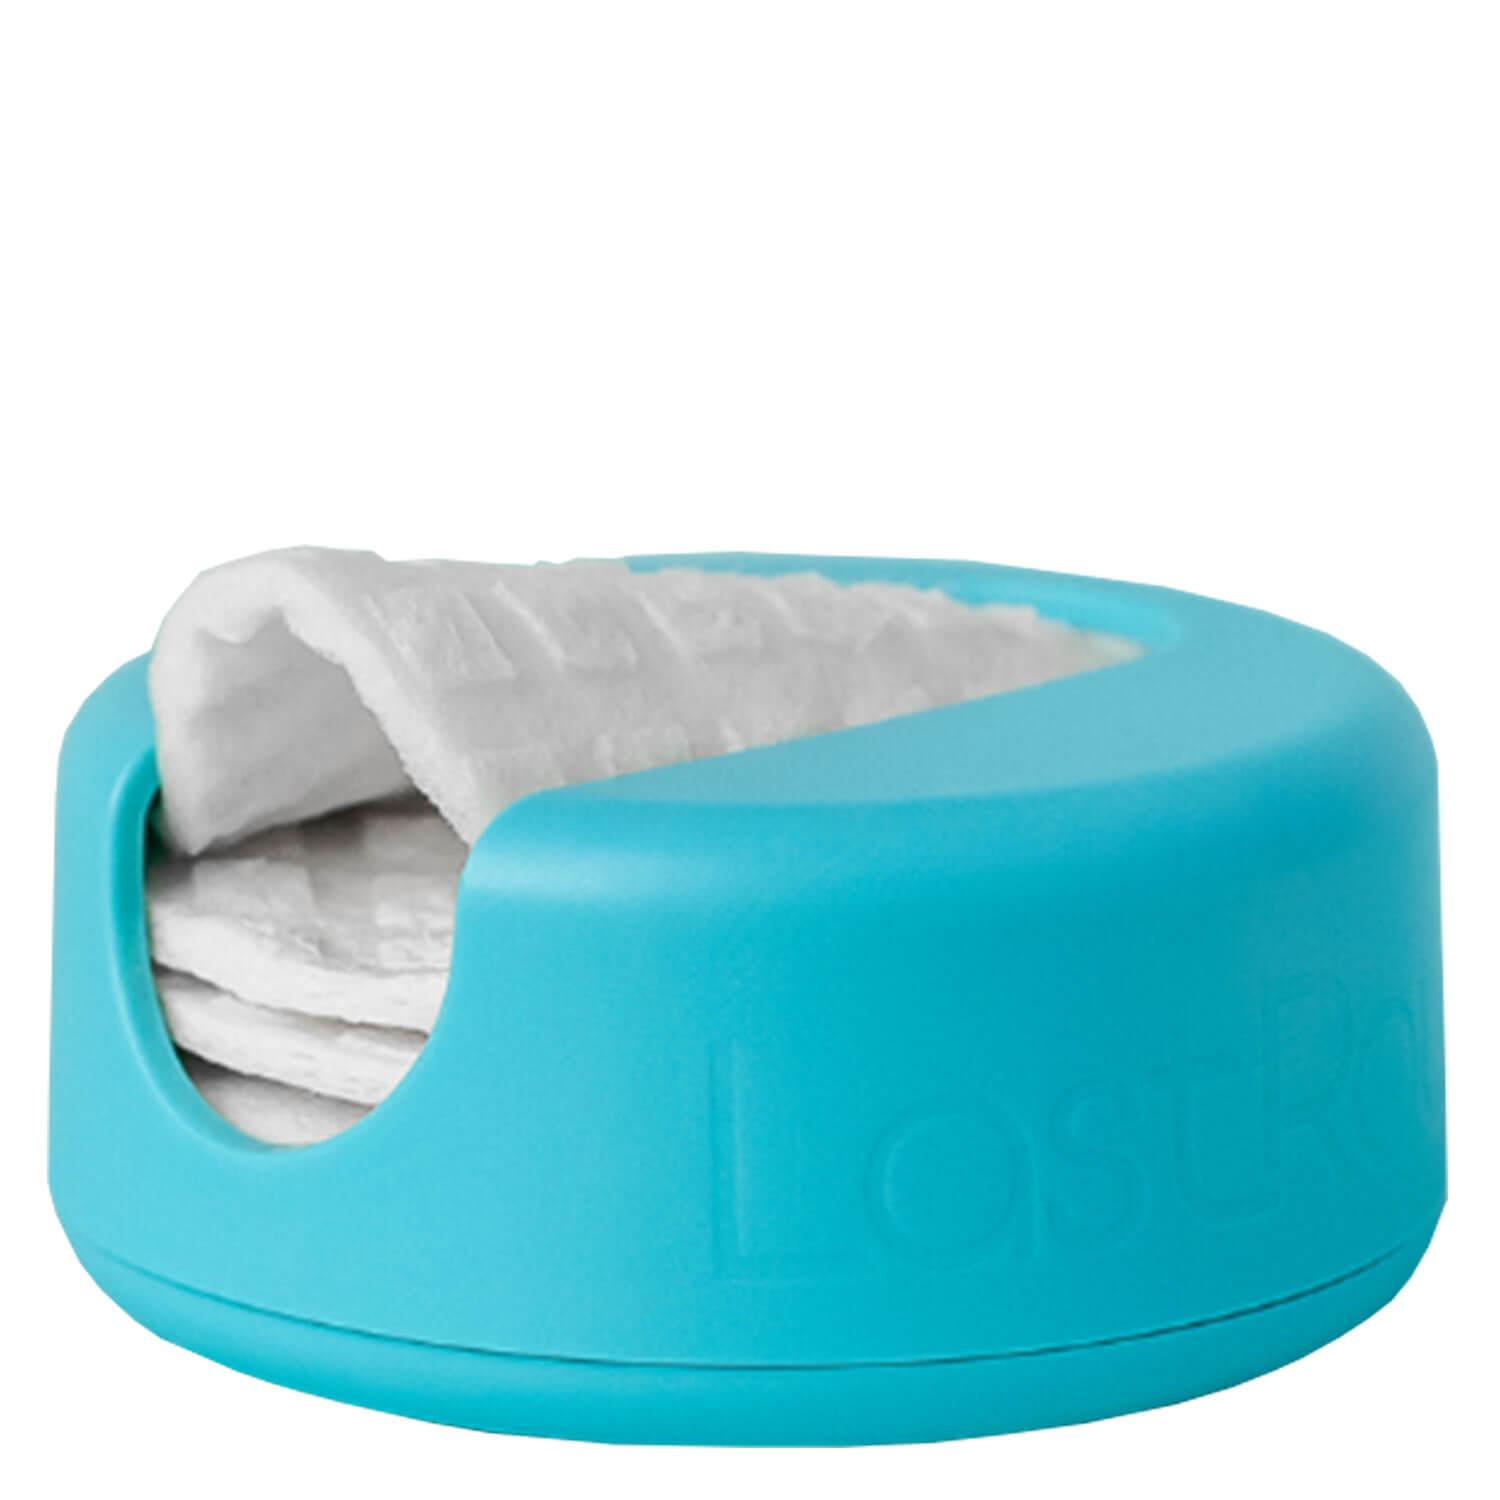 LastRound - Reusable Make-Up Removal Pads Turquoise